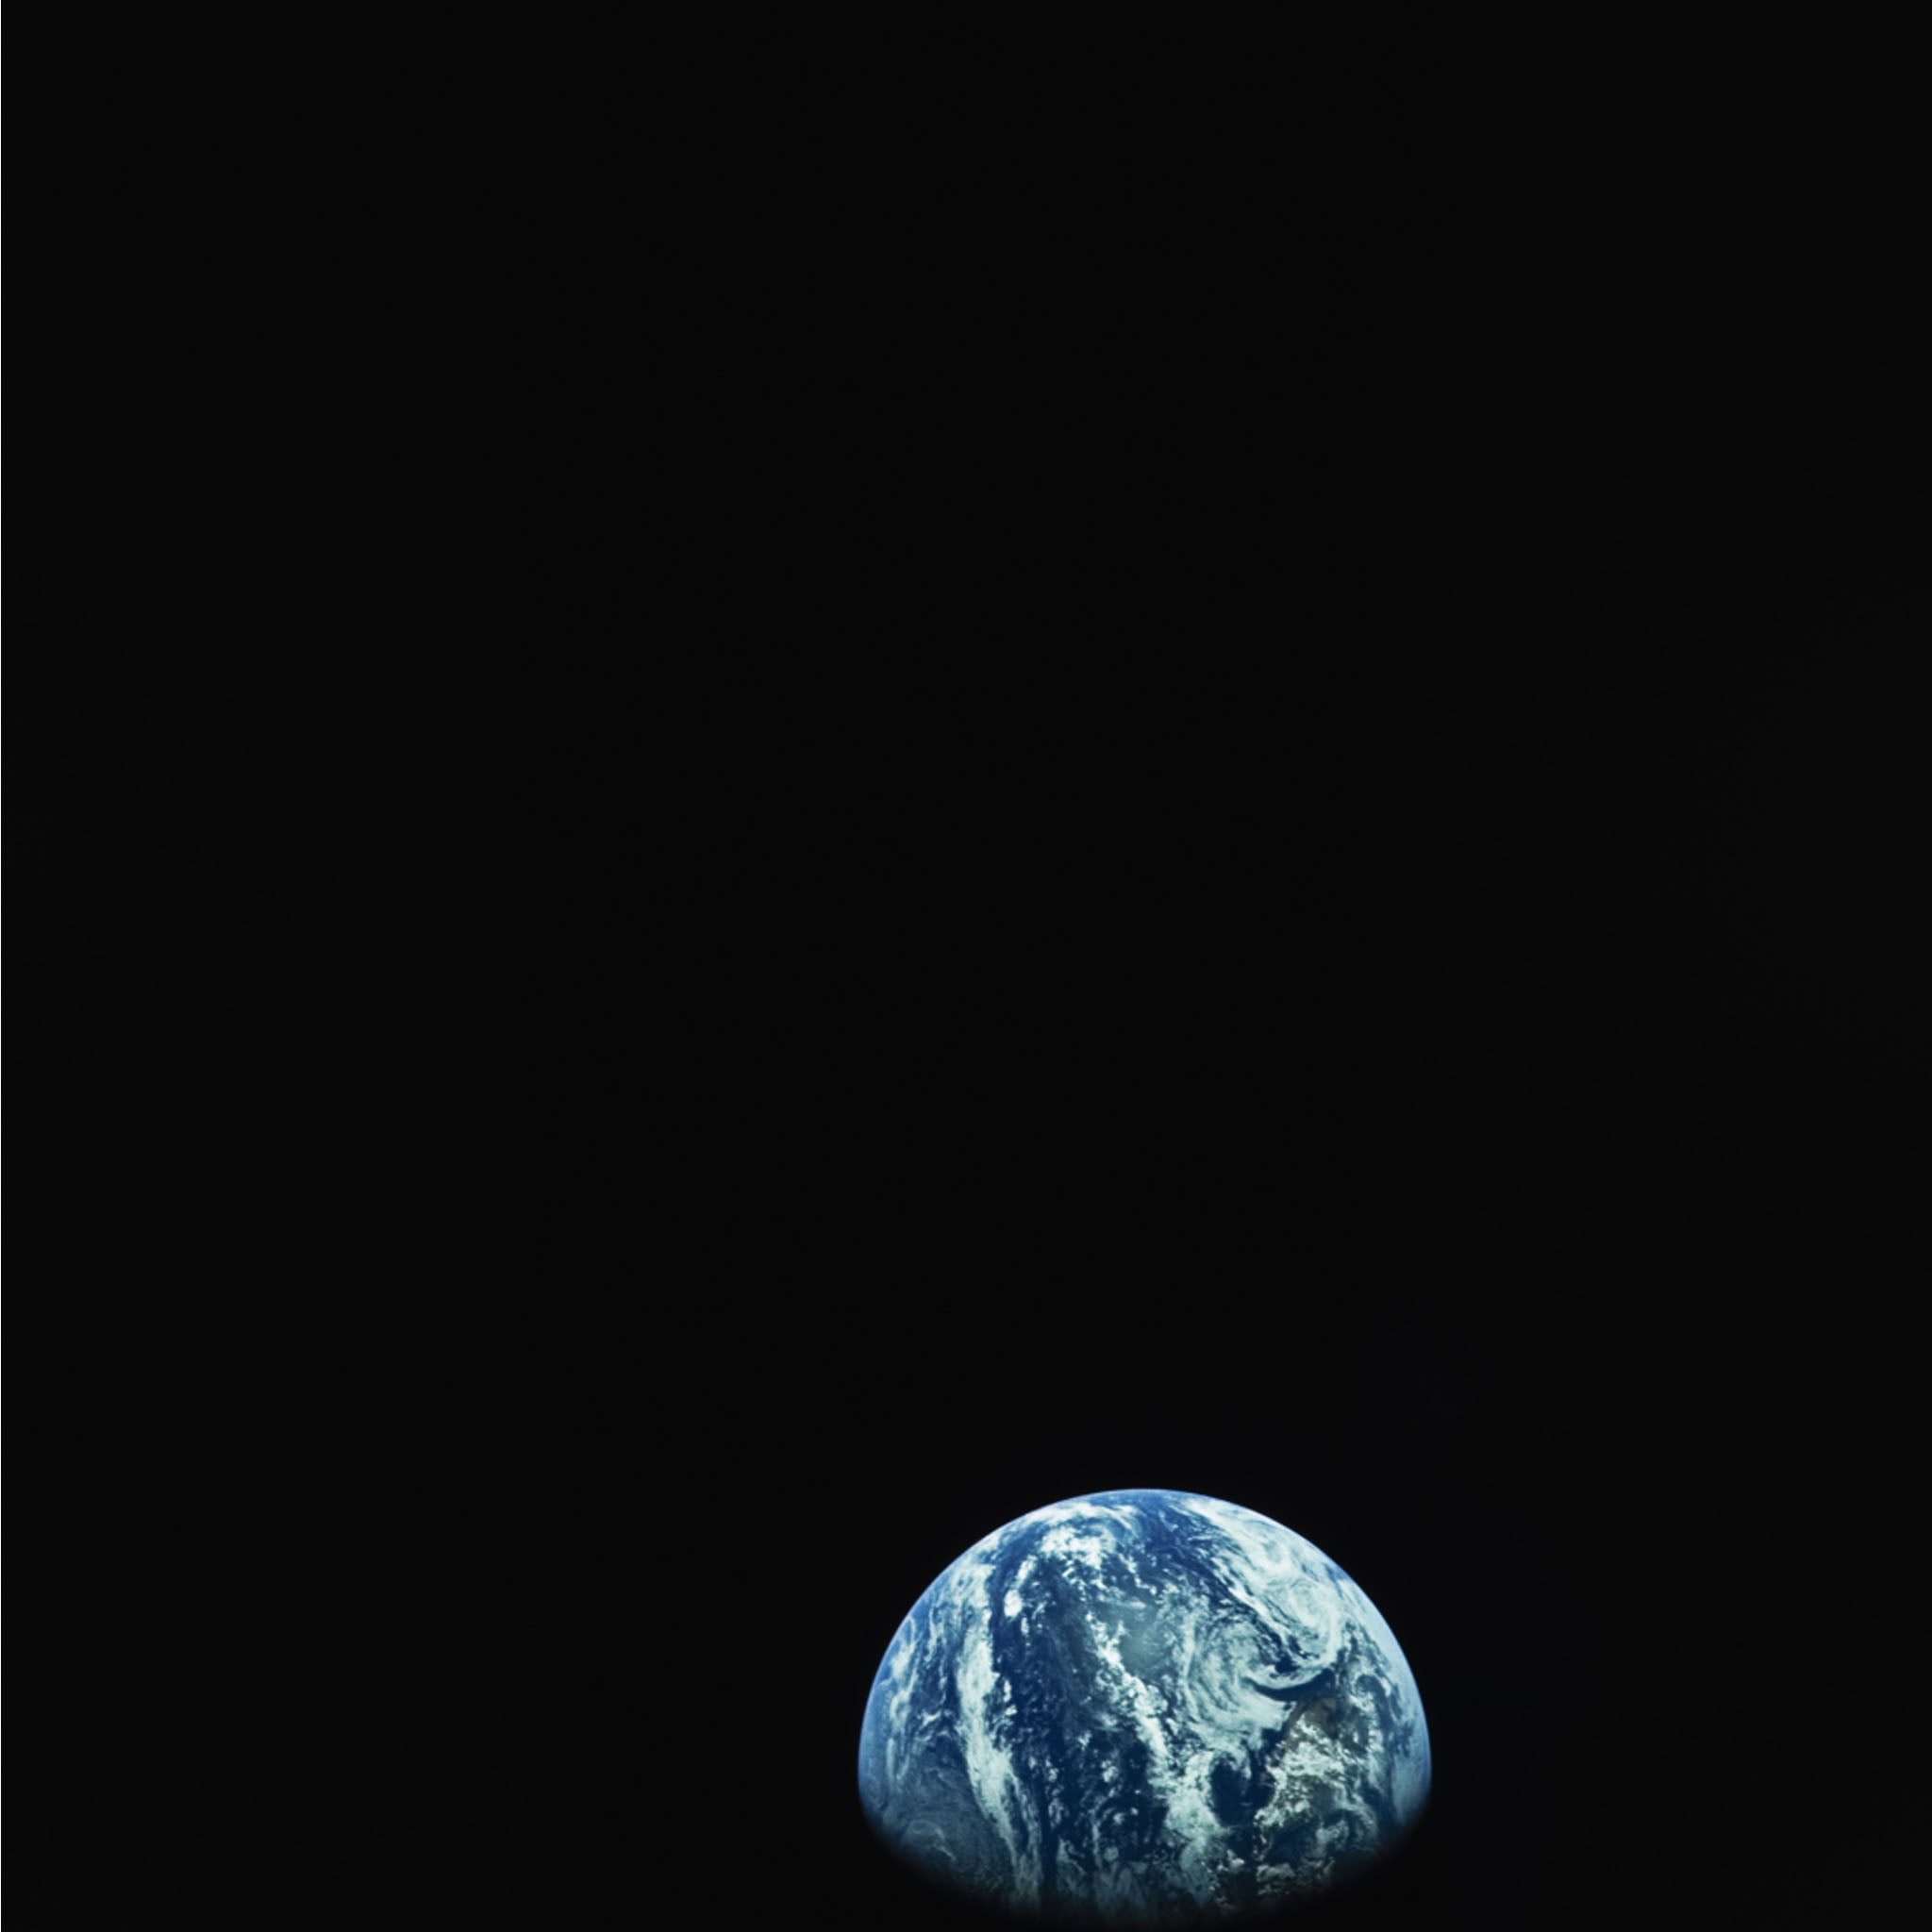 The Earth, the home